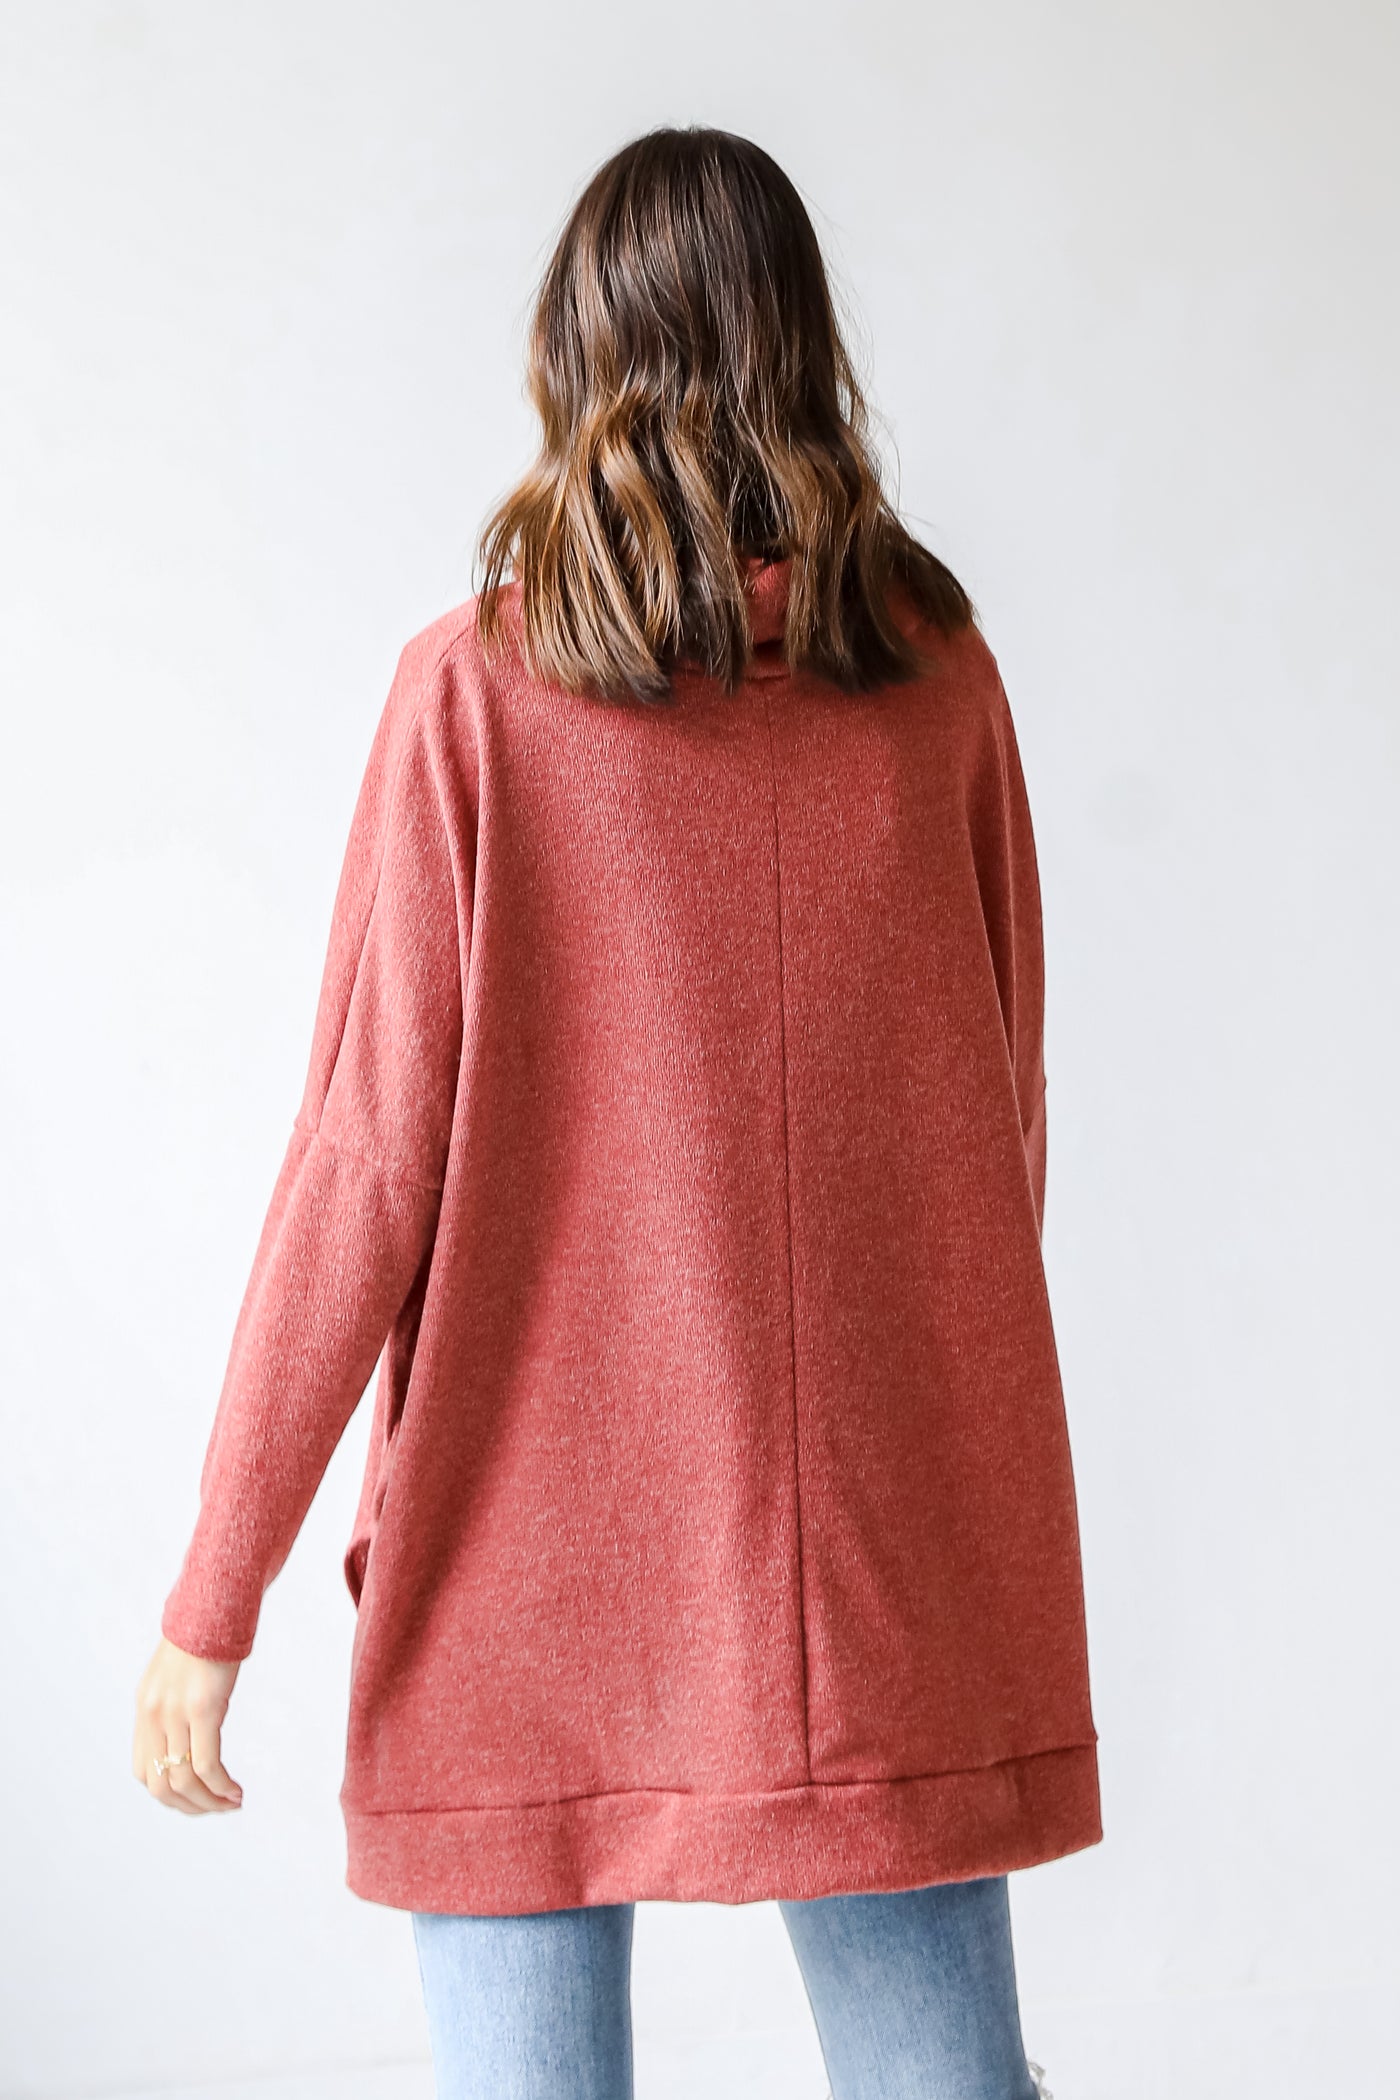 Cowl Neck Knit Top in rust back view